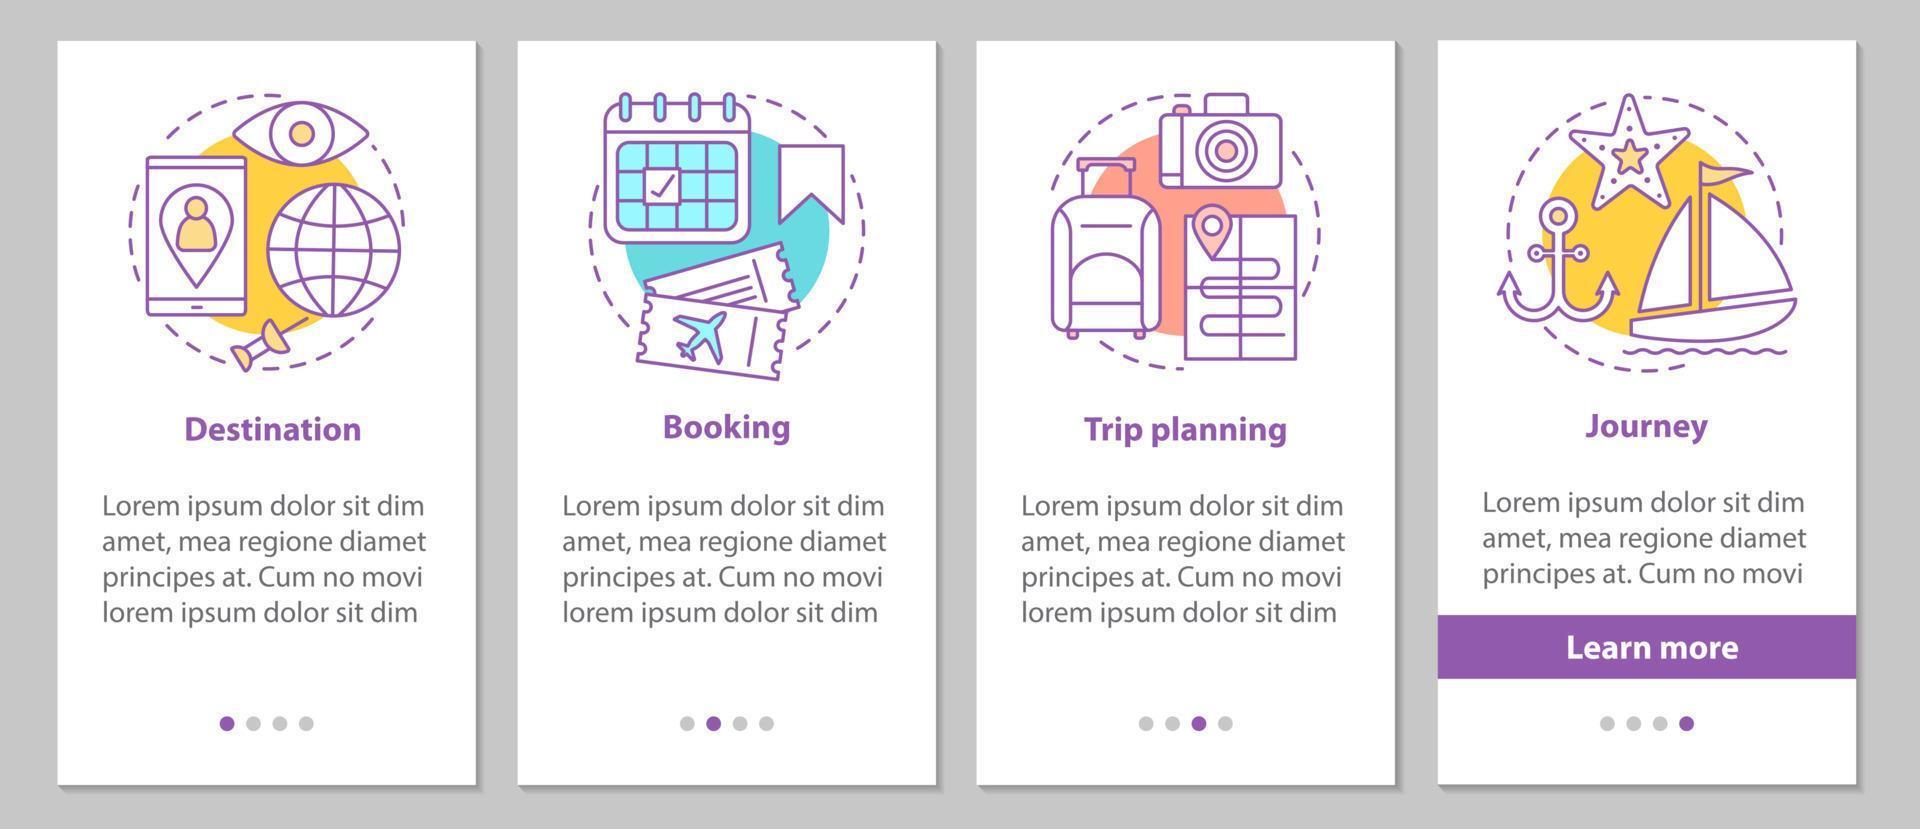 Travel organization onboarding mobile app page screen with linear concepts. Trip planning steps graphic instructions. UX, UI, GUI vector template with illustrations